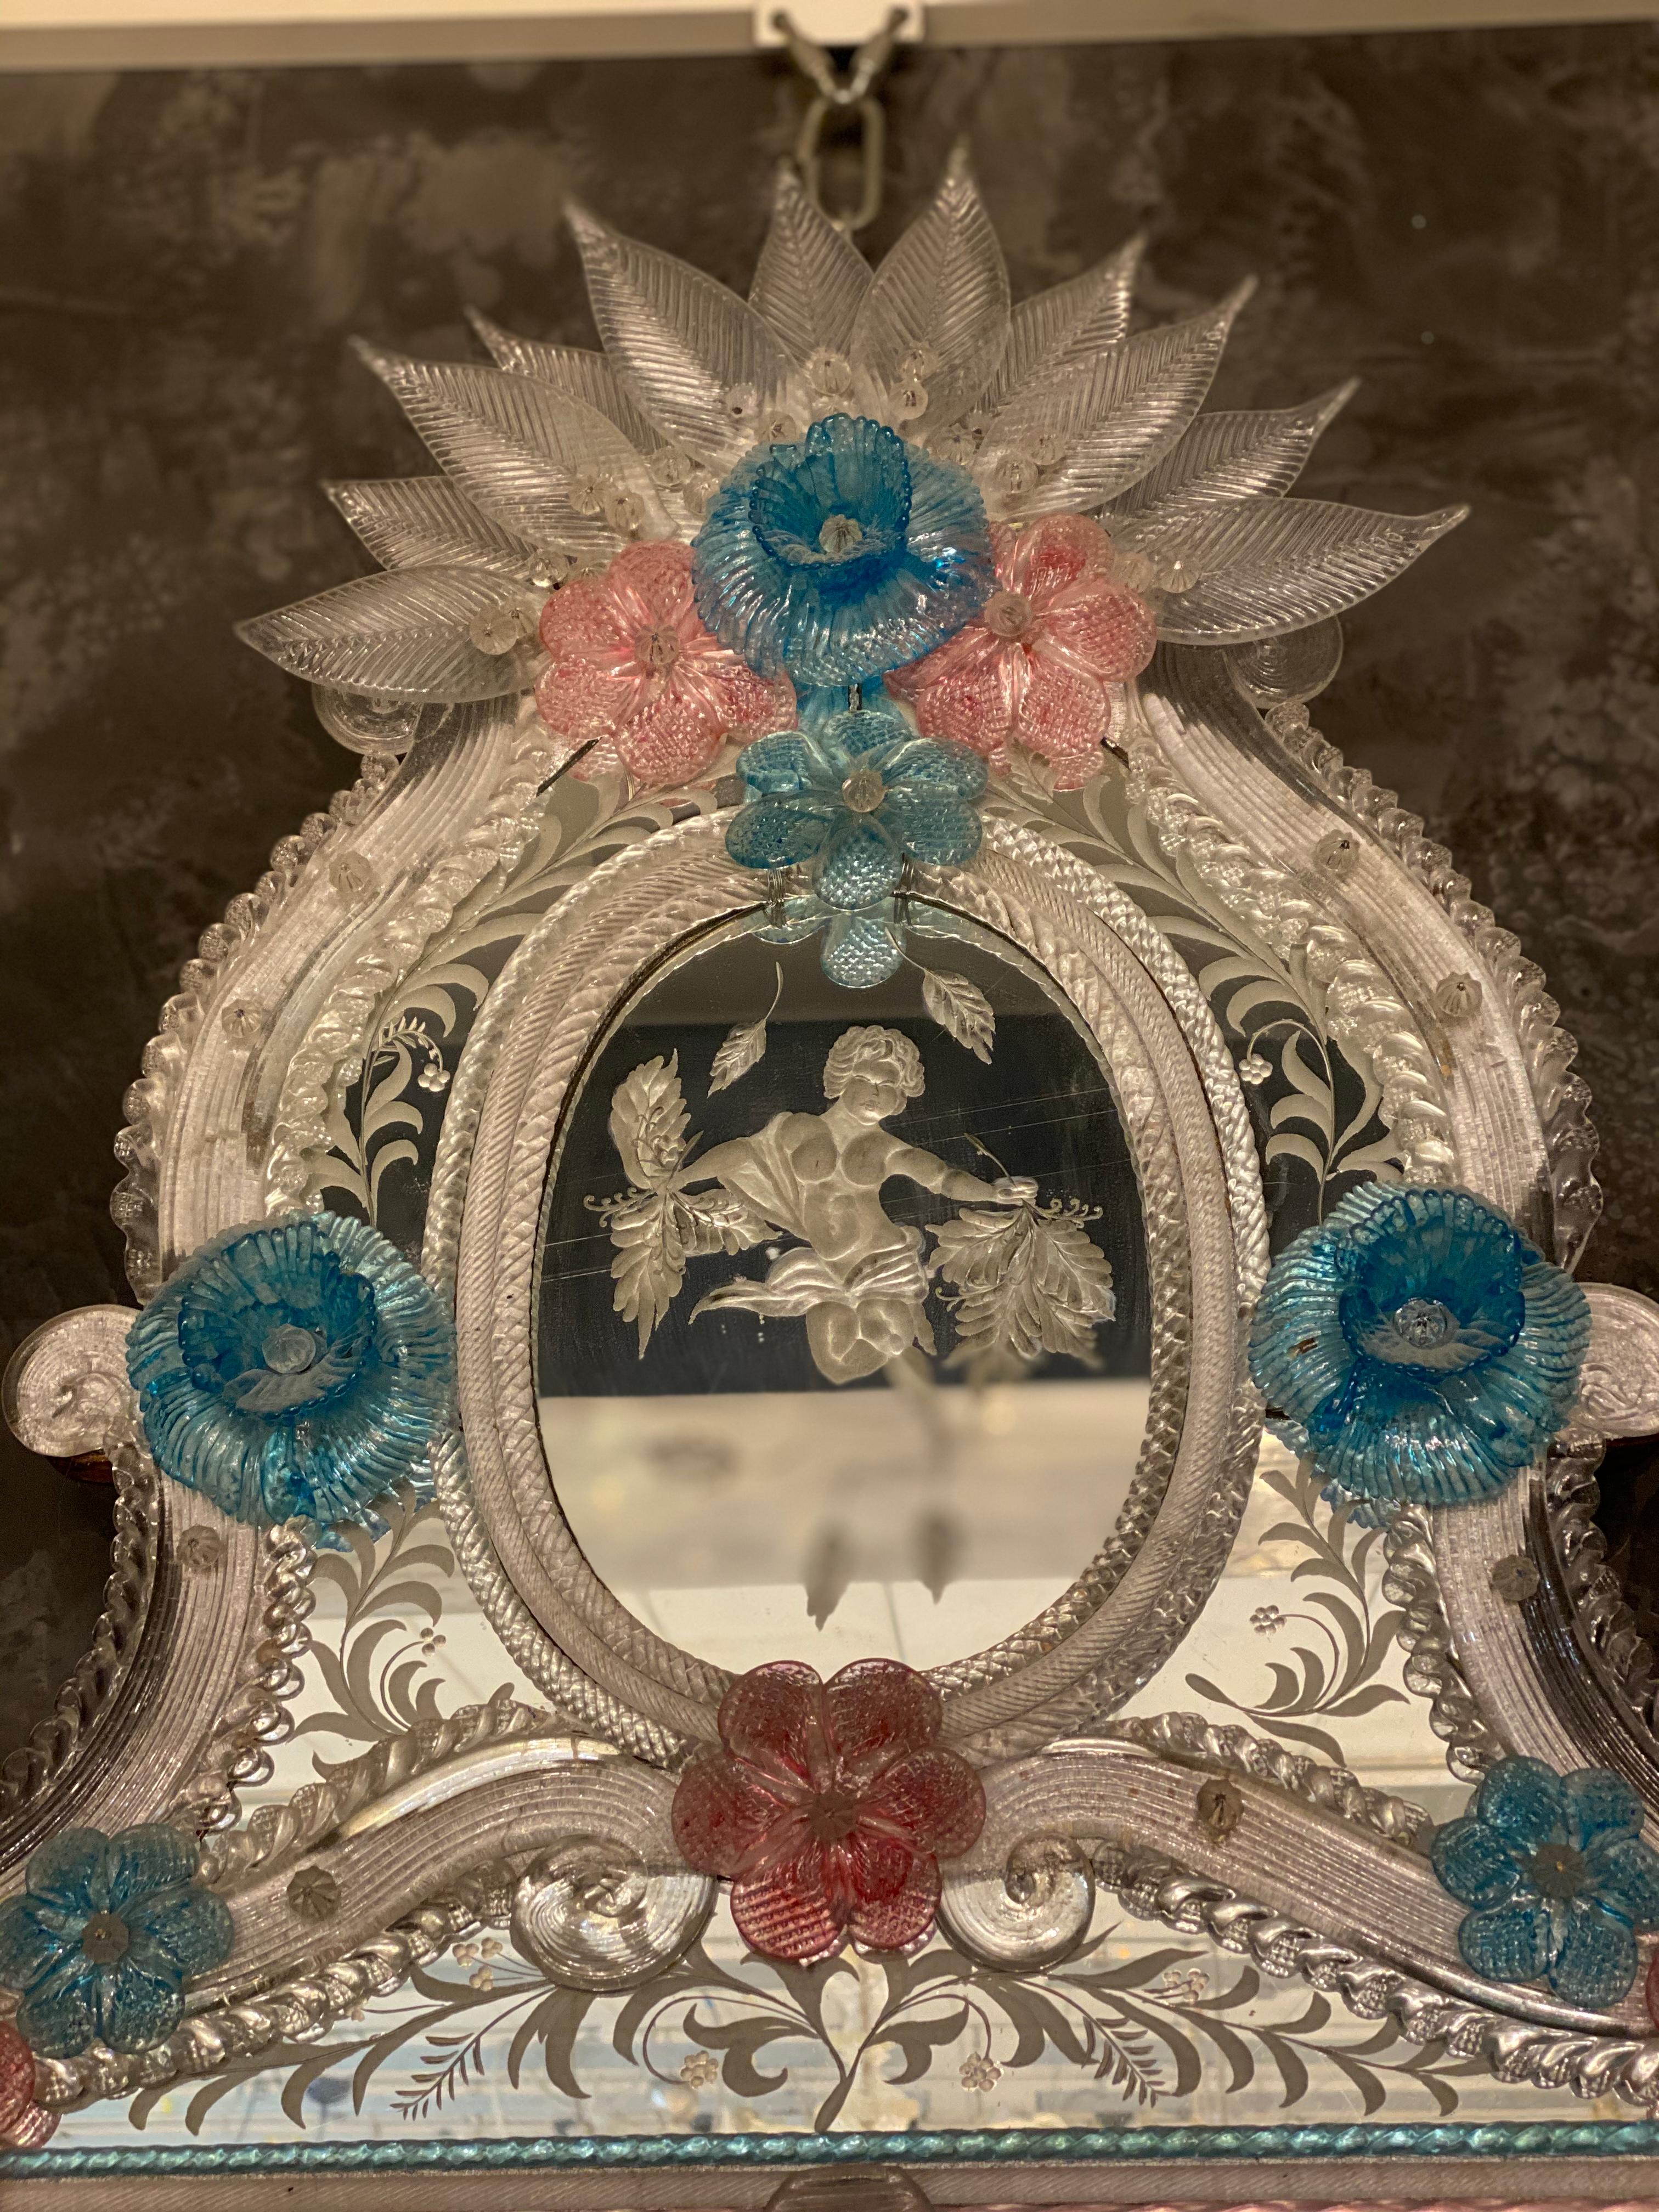 Superb Huge Murano Glass Mirror By Veneziani Arte In Excellent Condition For Sale In Rome, IT